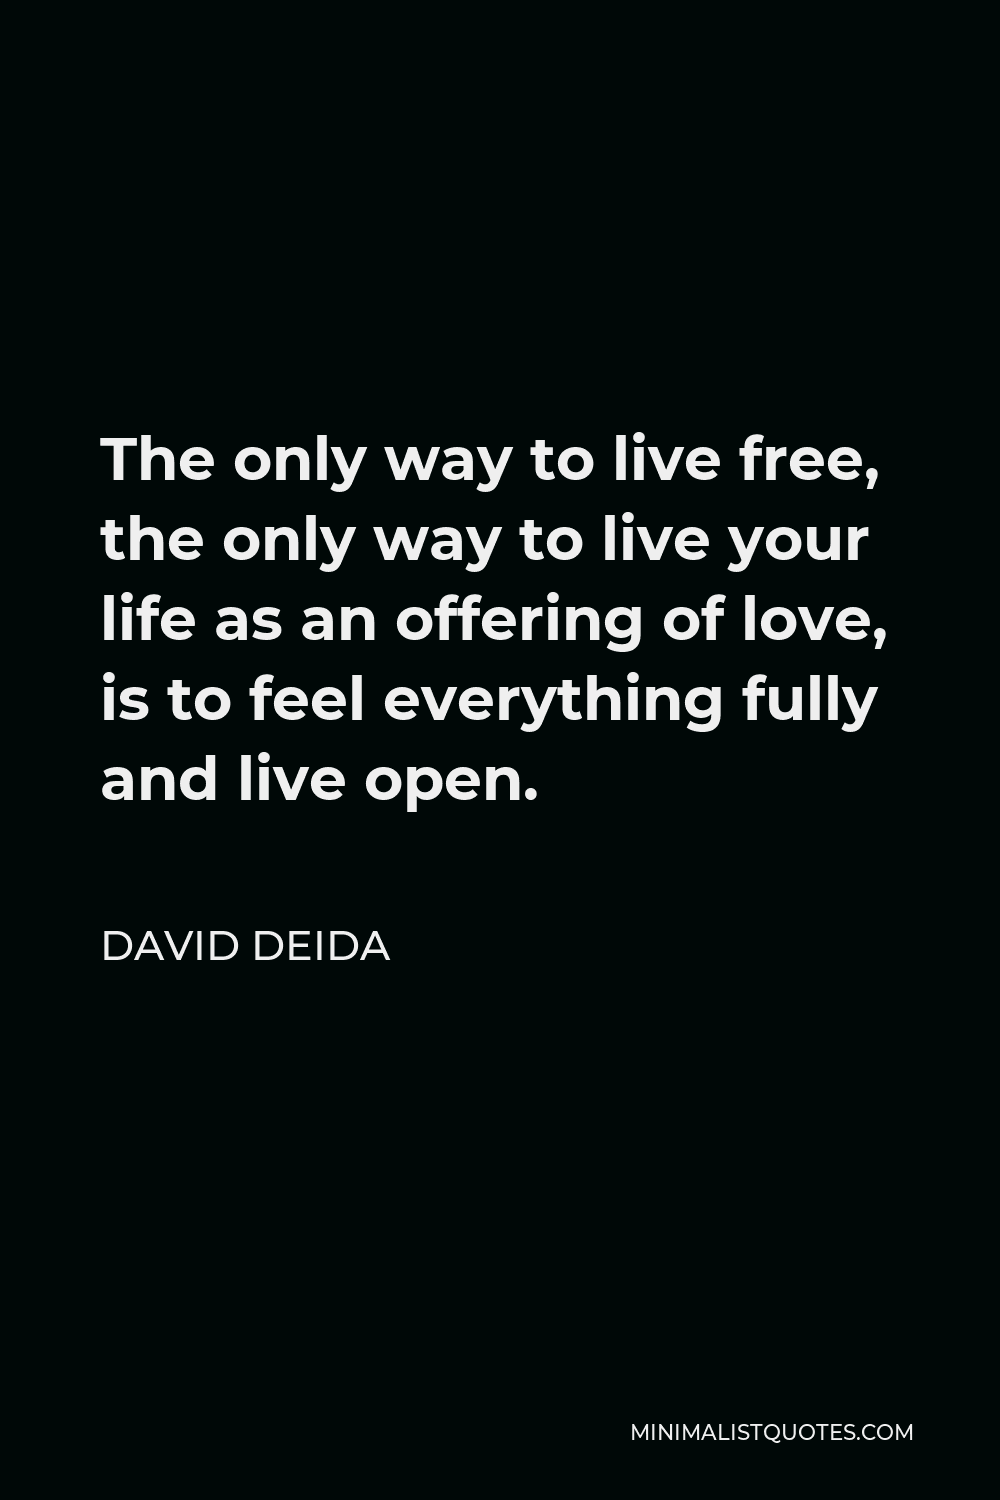 David Deida Quote - The only way to live free, the only way to live your life as an offering of love, is to feel everything fully and live open.